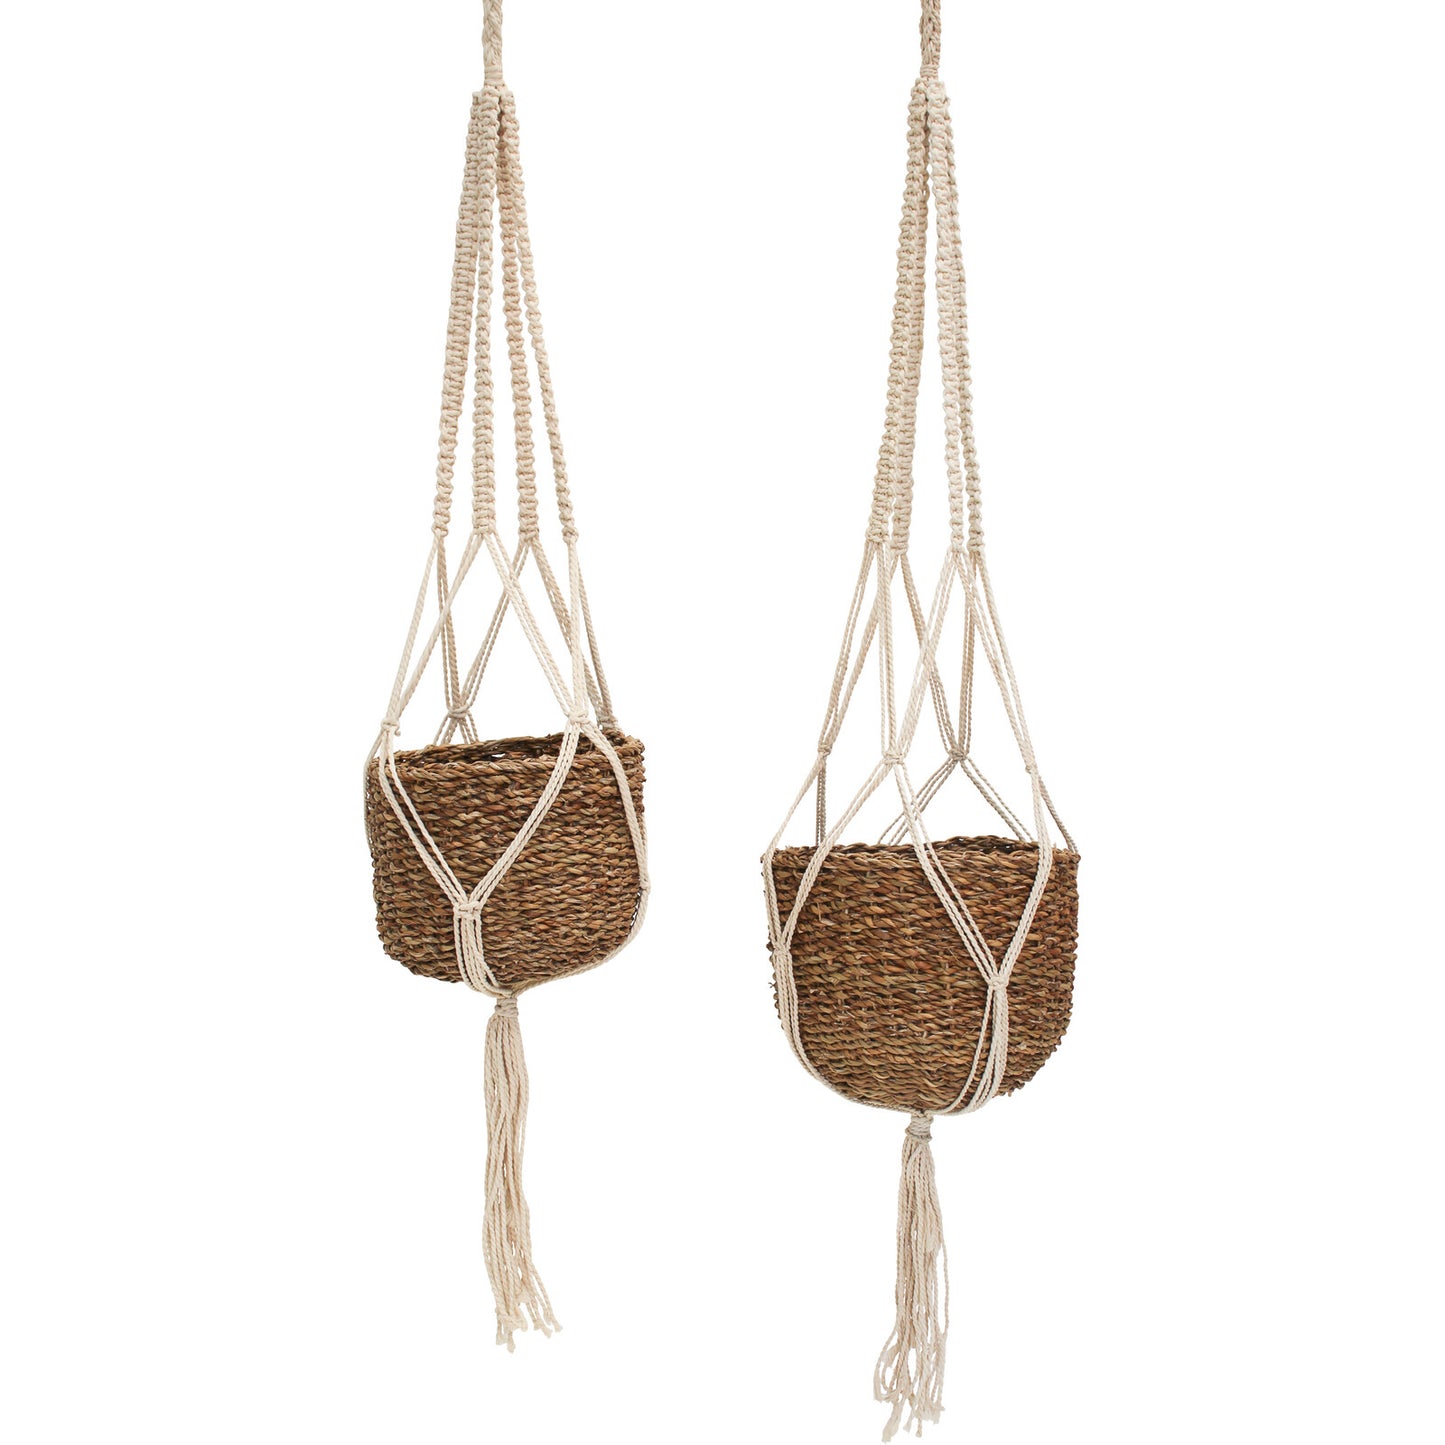 Sea grass and rope hanging plant pot basket set of 2